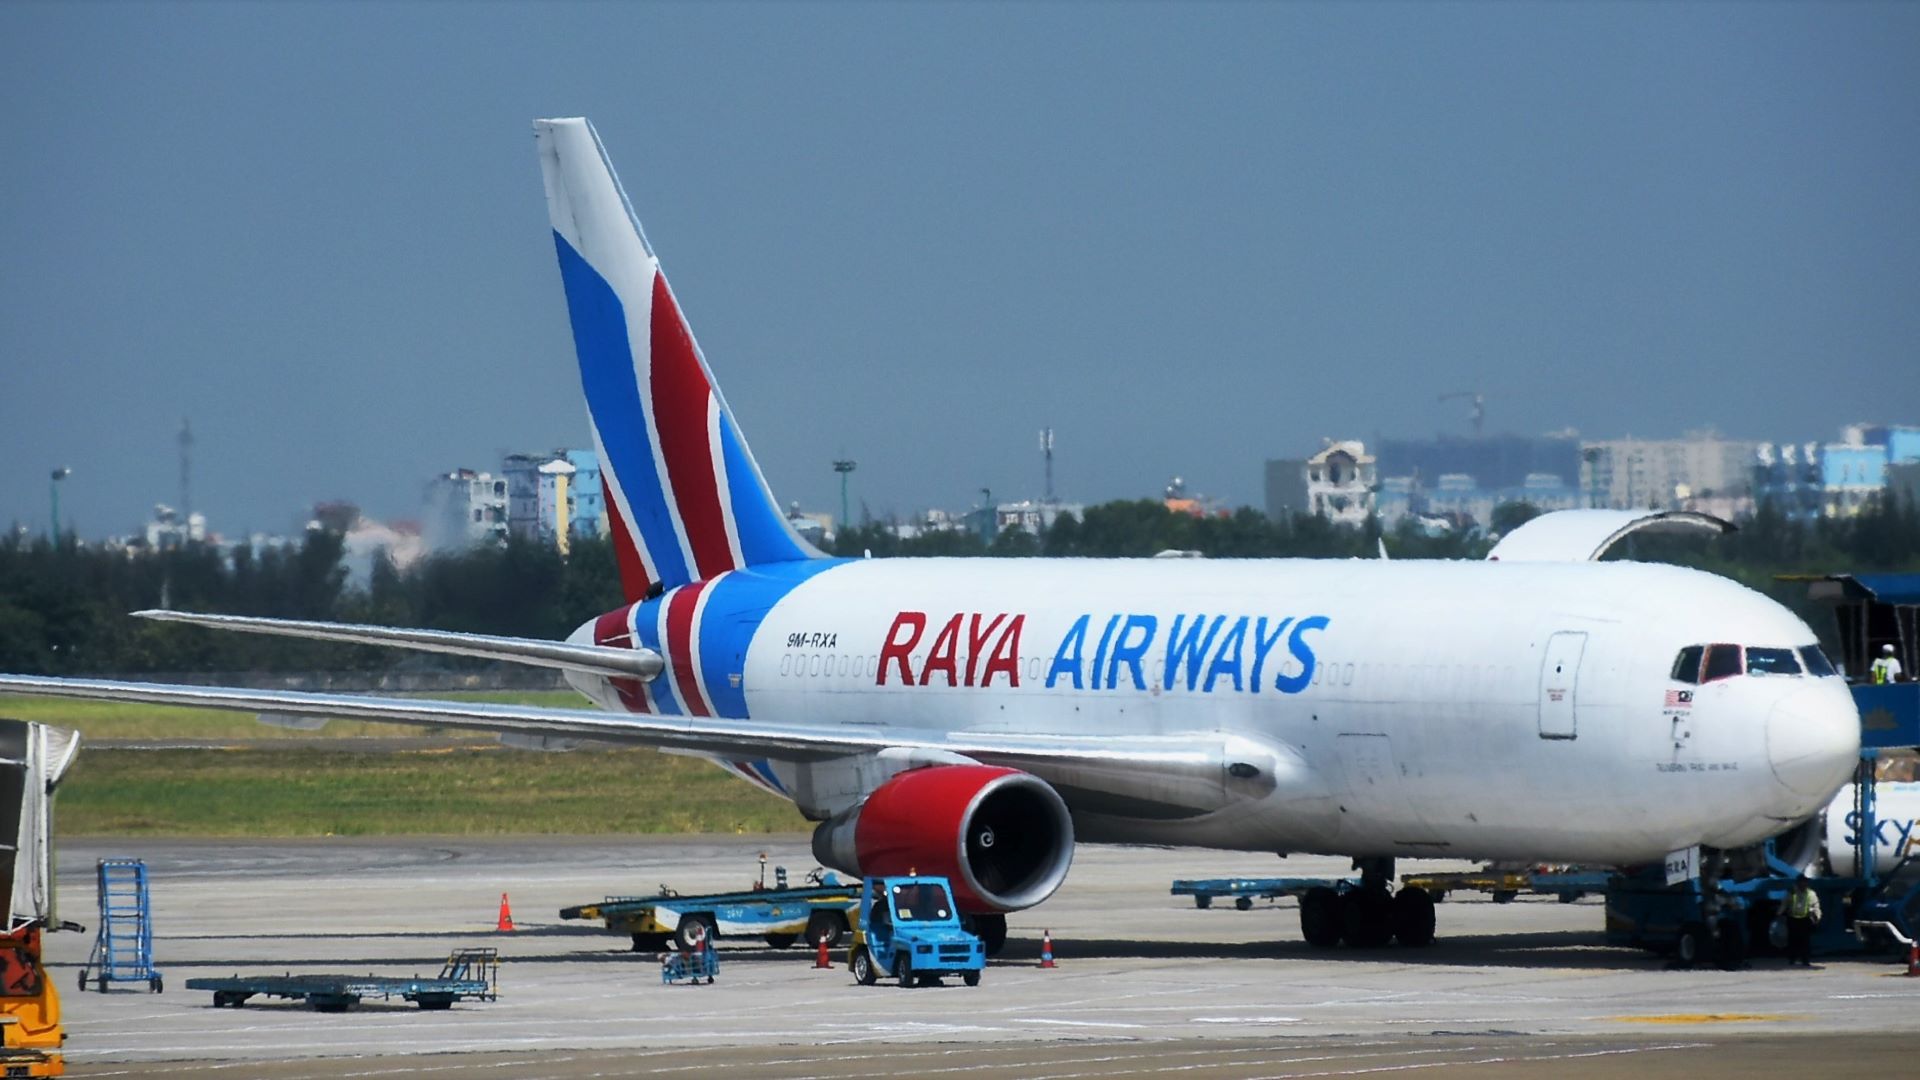 A white jetliner with blue/red tail and logo Raya Airways sits on the tarmac on a sunny day.